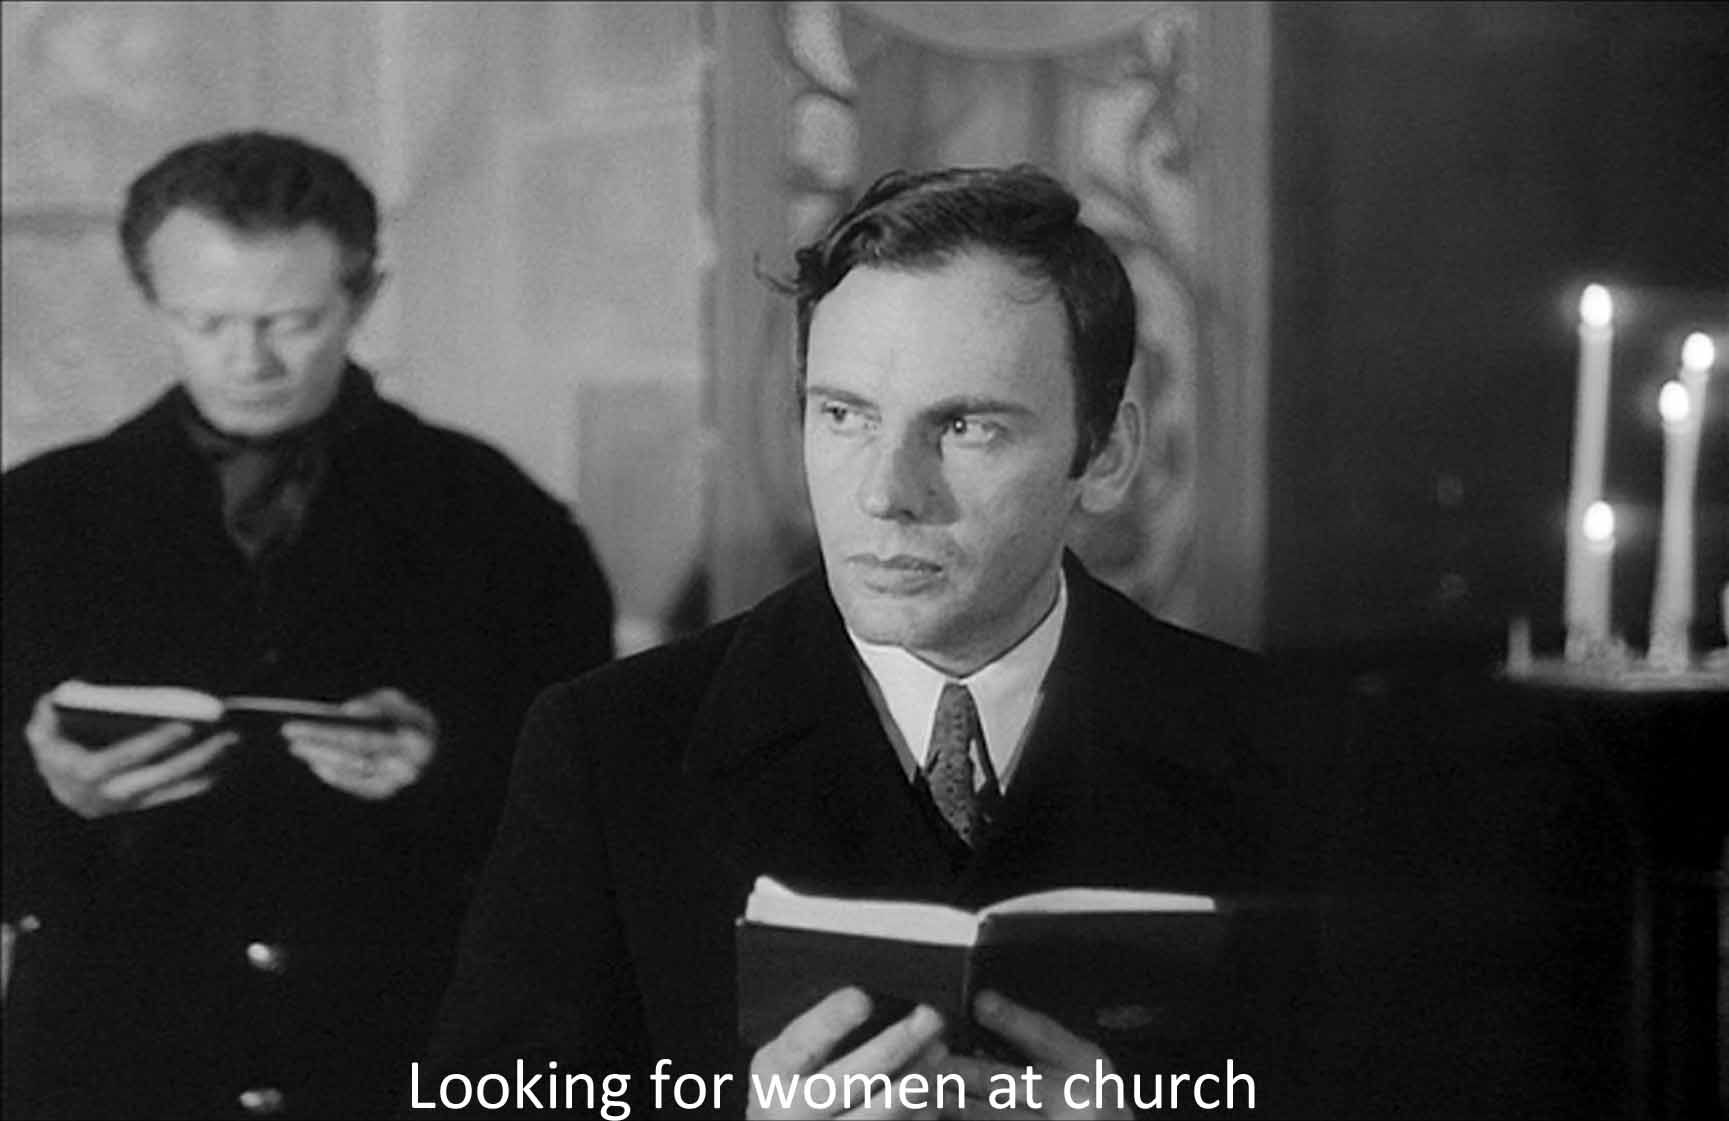 Looking for women at church